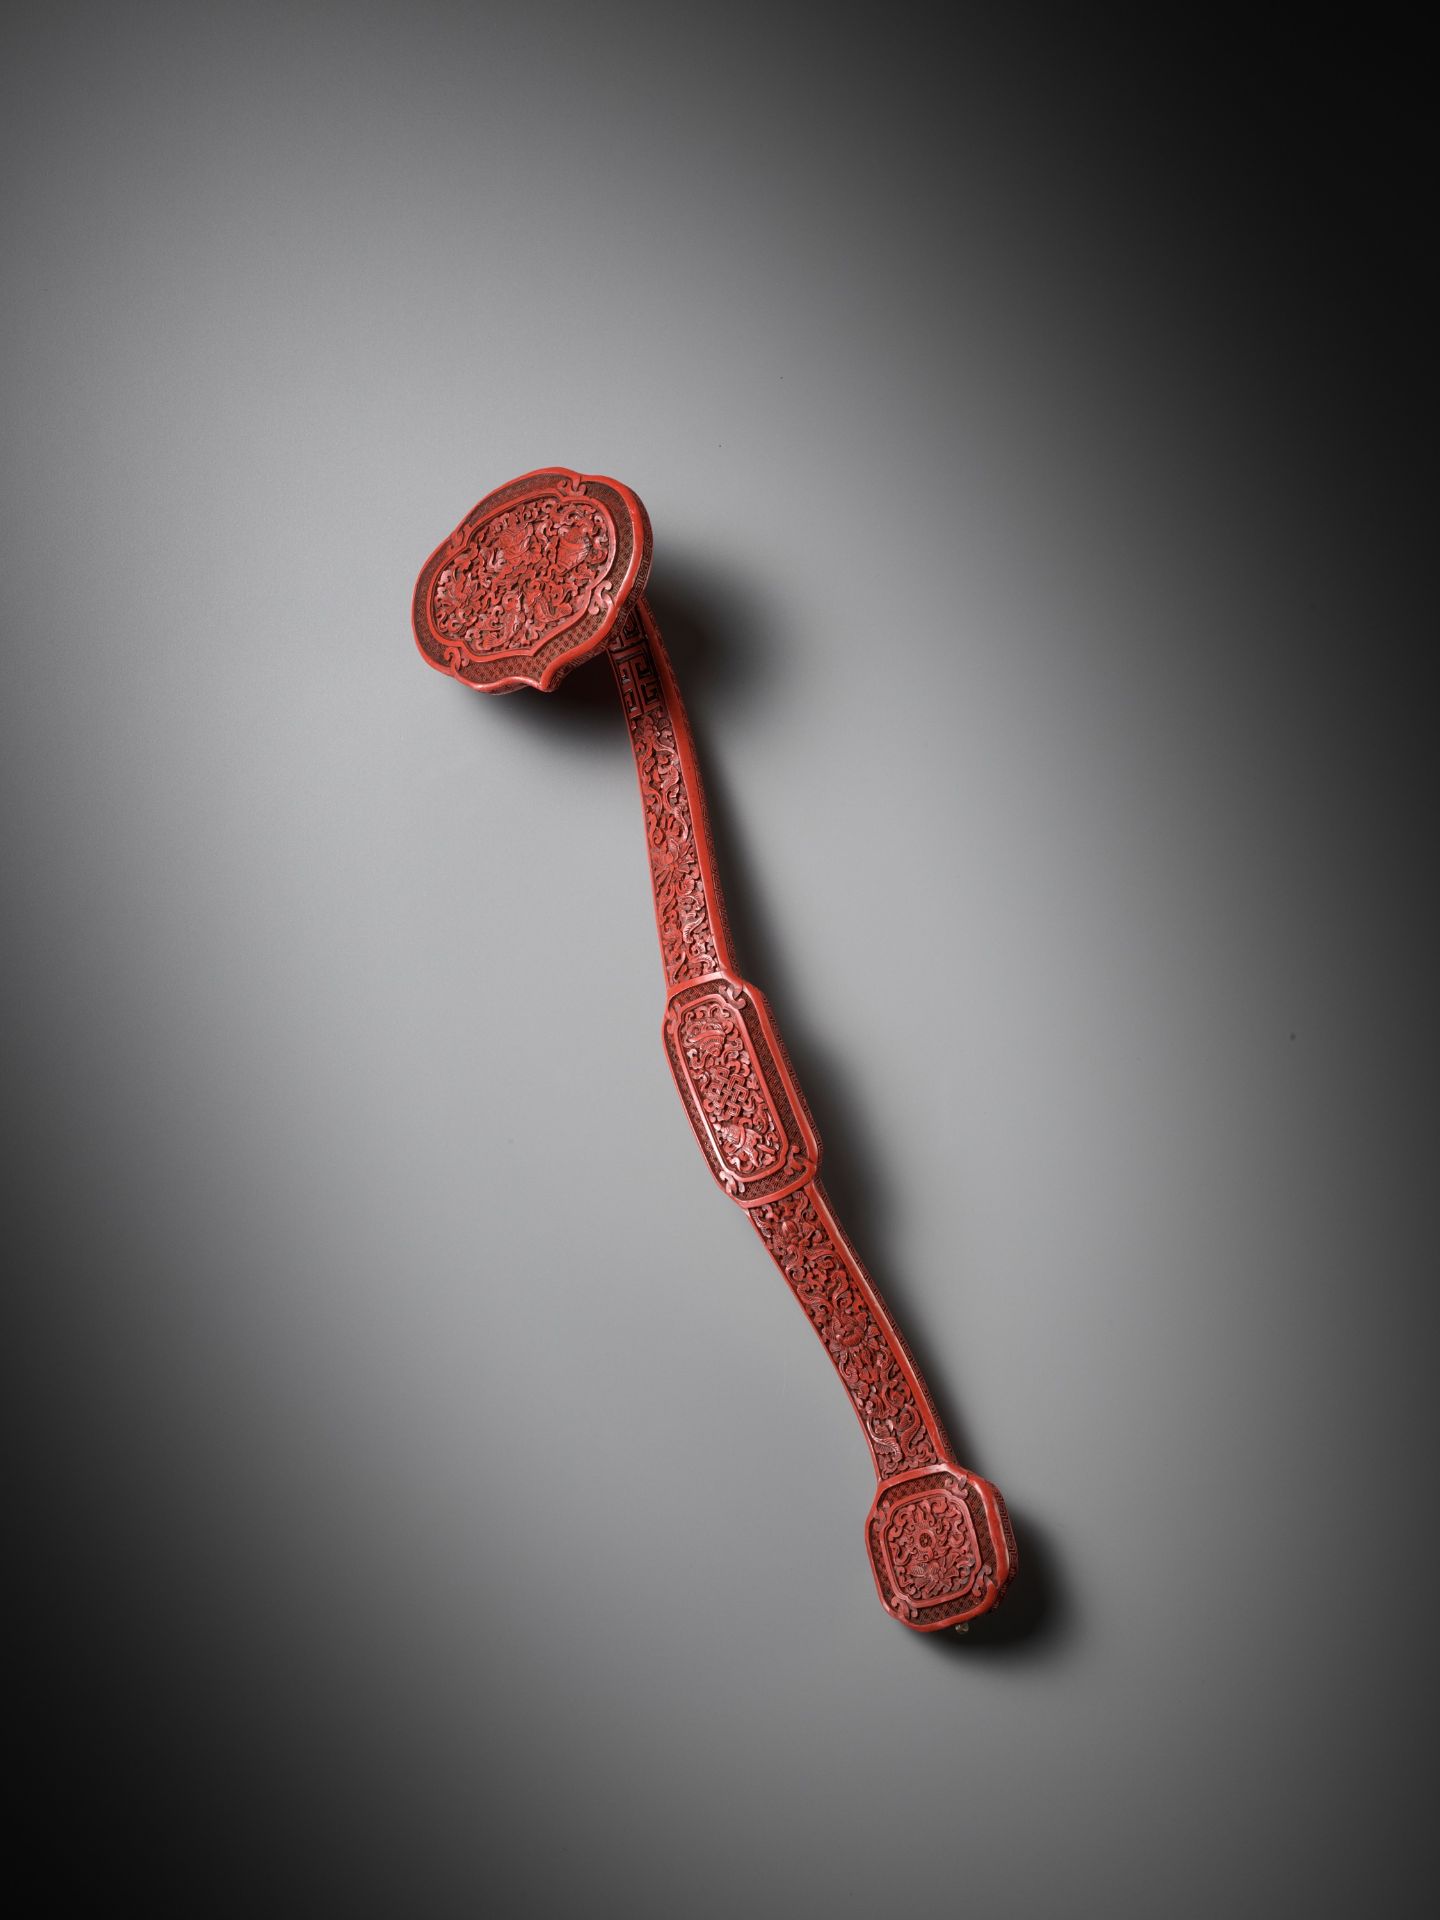 A CARVED CINNABAR LACQUER 'BAJIXIANG' RUYI SCEPTER, QING DYNASTY - Image 10 of 10